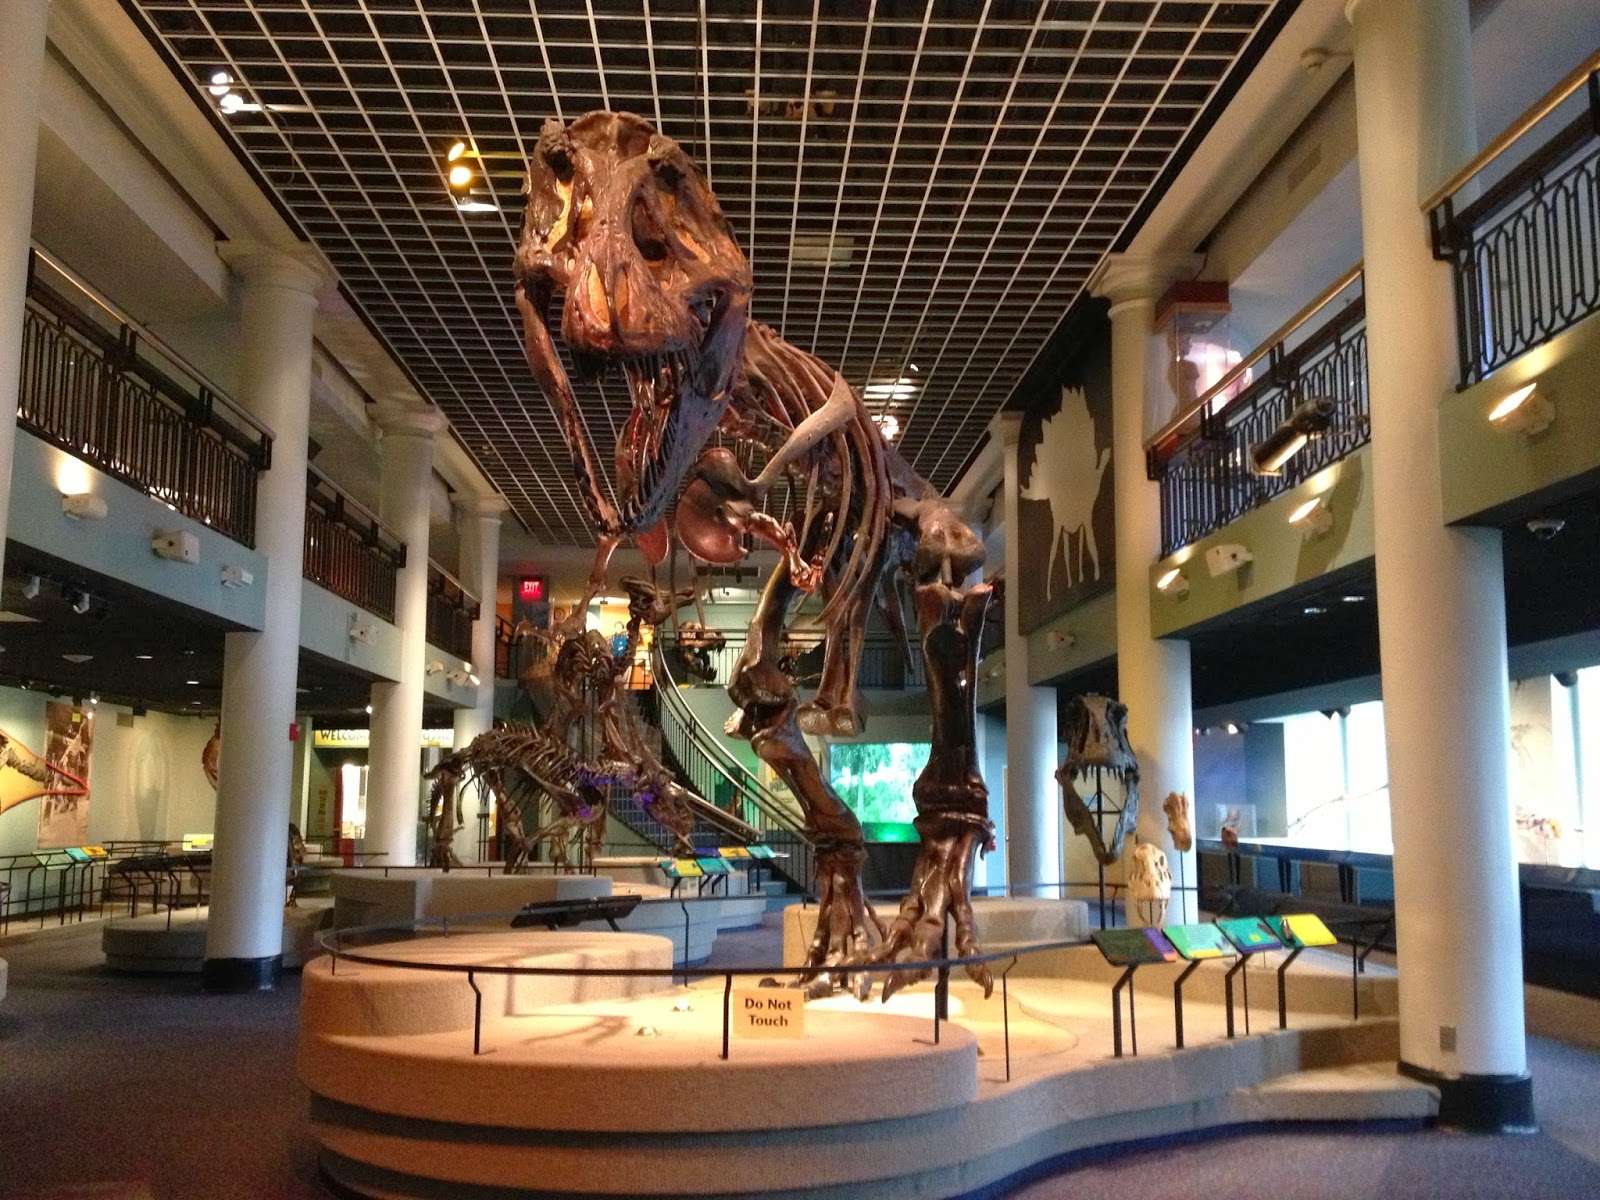 DAILY VACATIONER: Dino Week: Academy of Natural Sciences